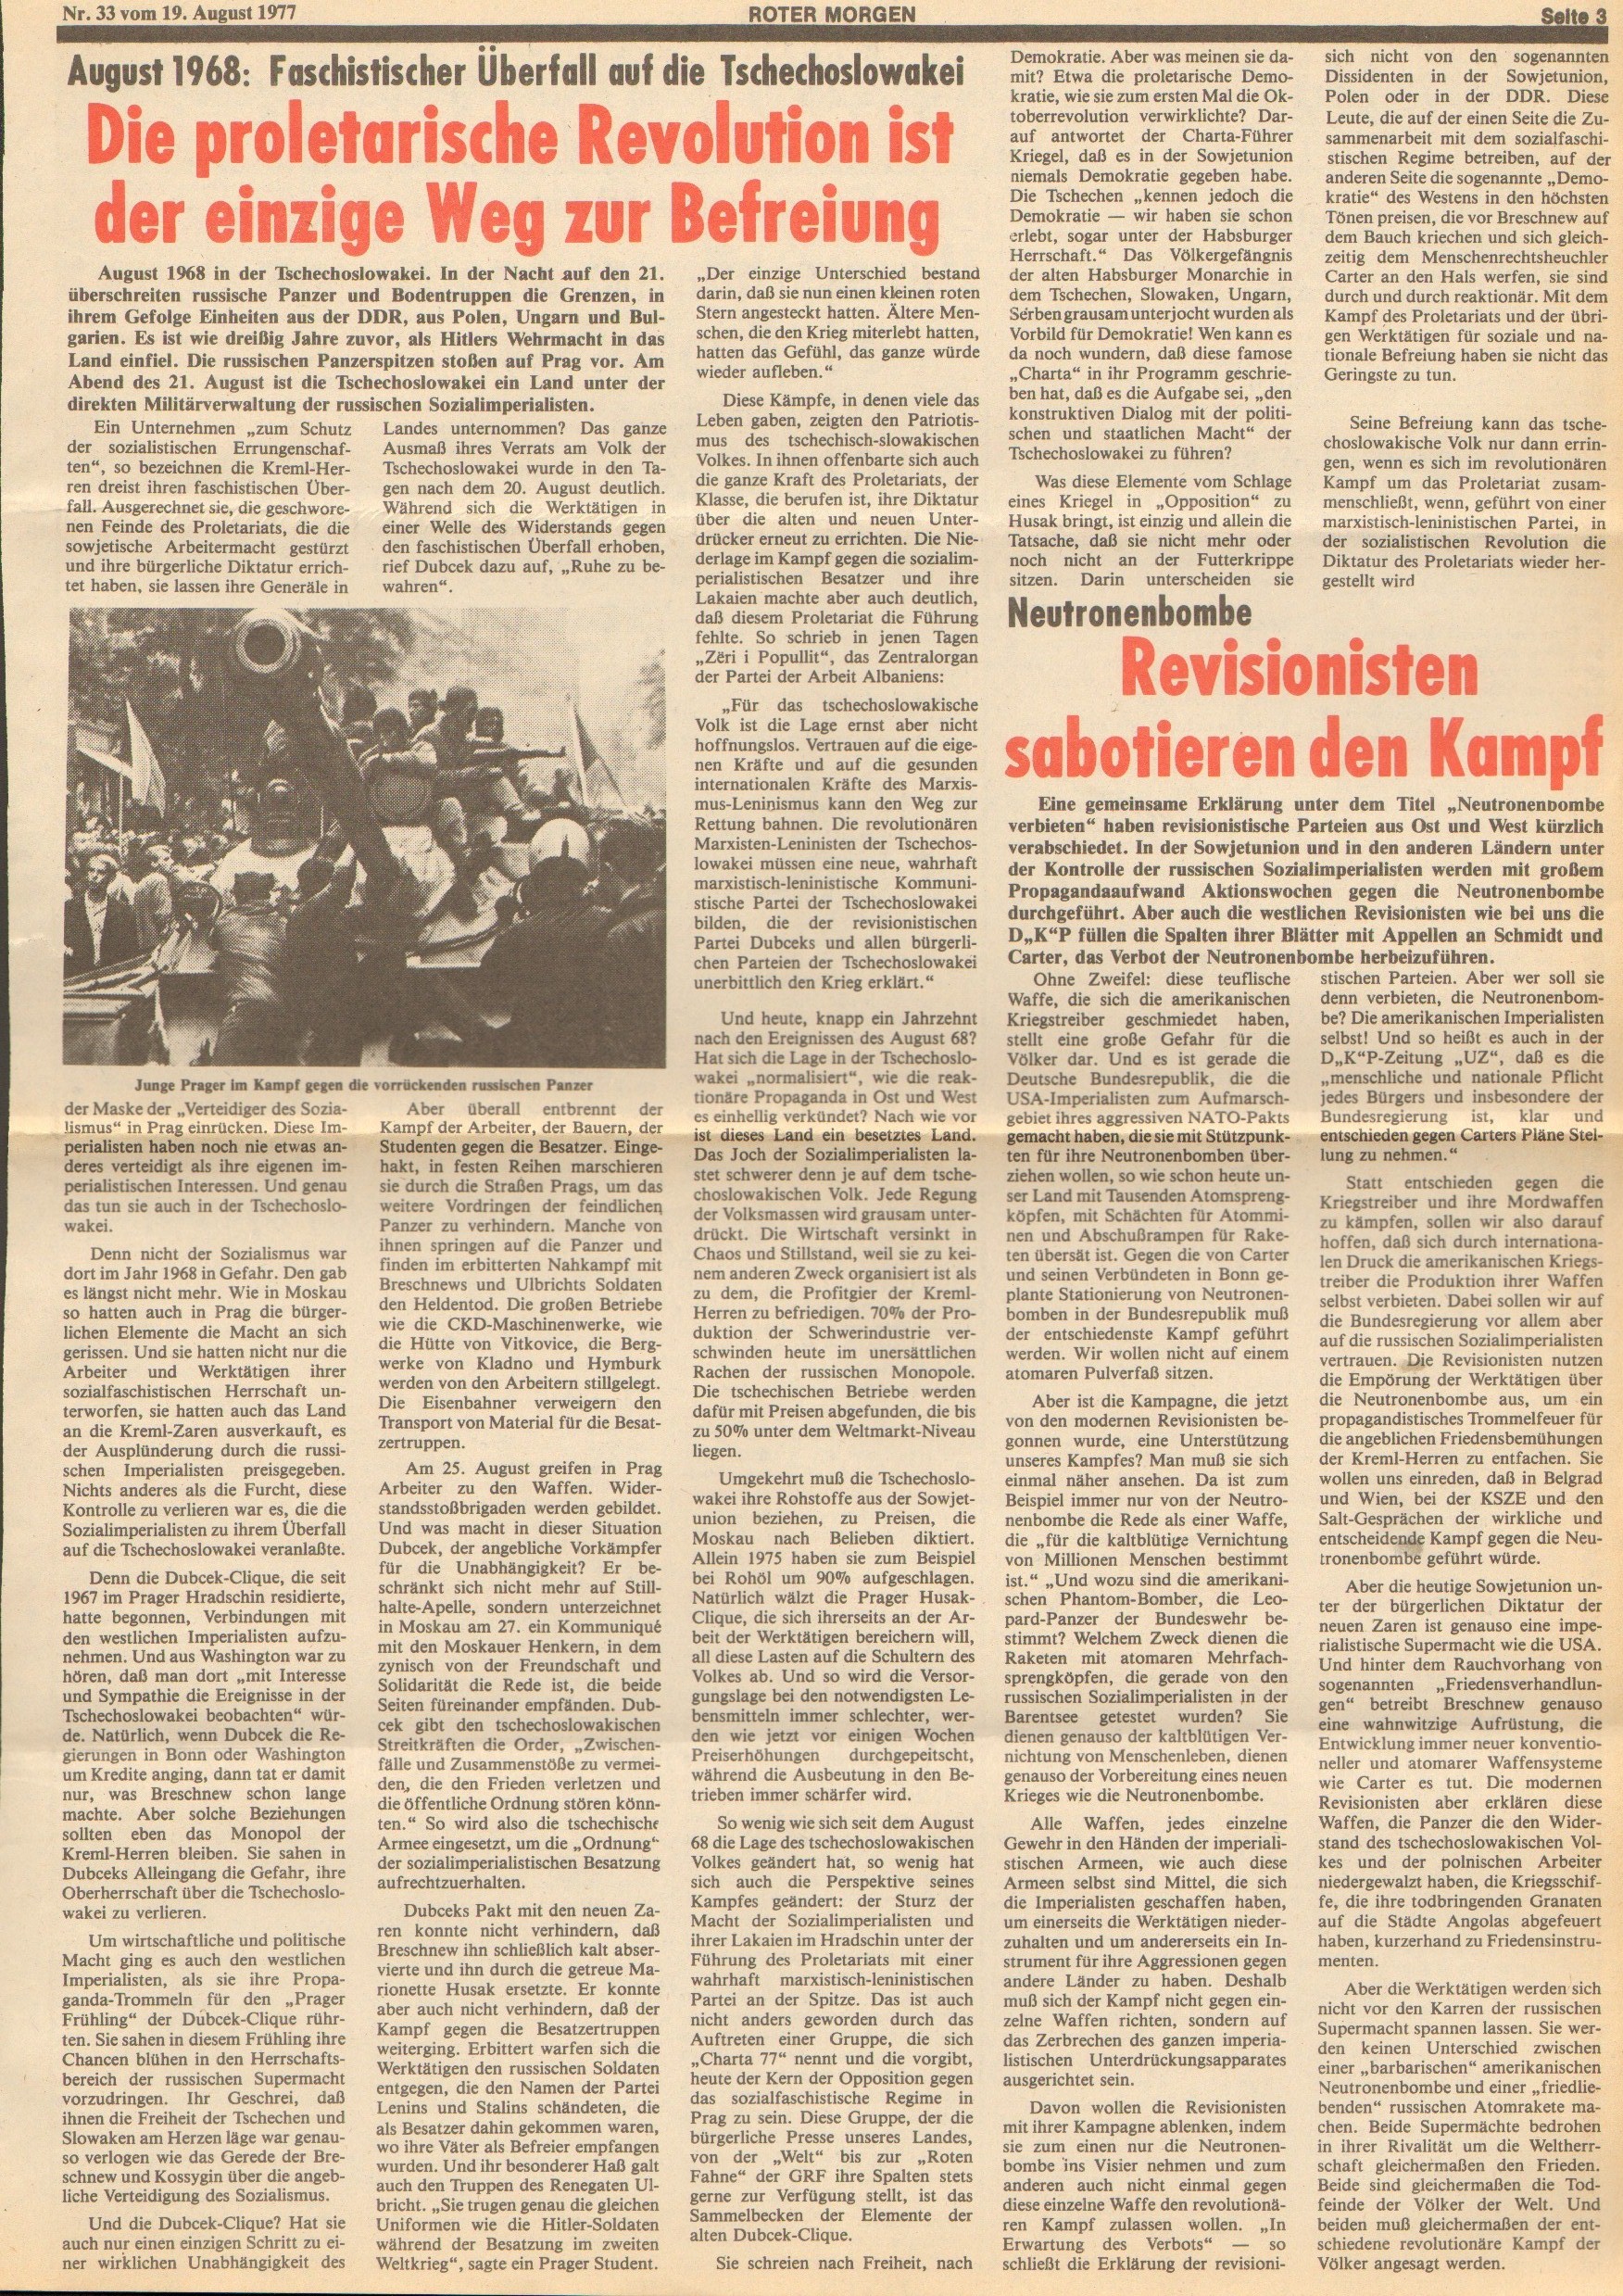 Roter Morgen, 11. Jg., 19. August 1977, Nr. 33, Seite 3